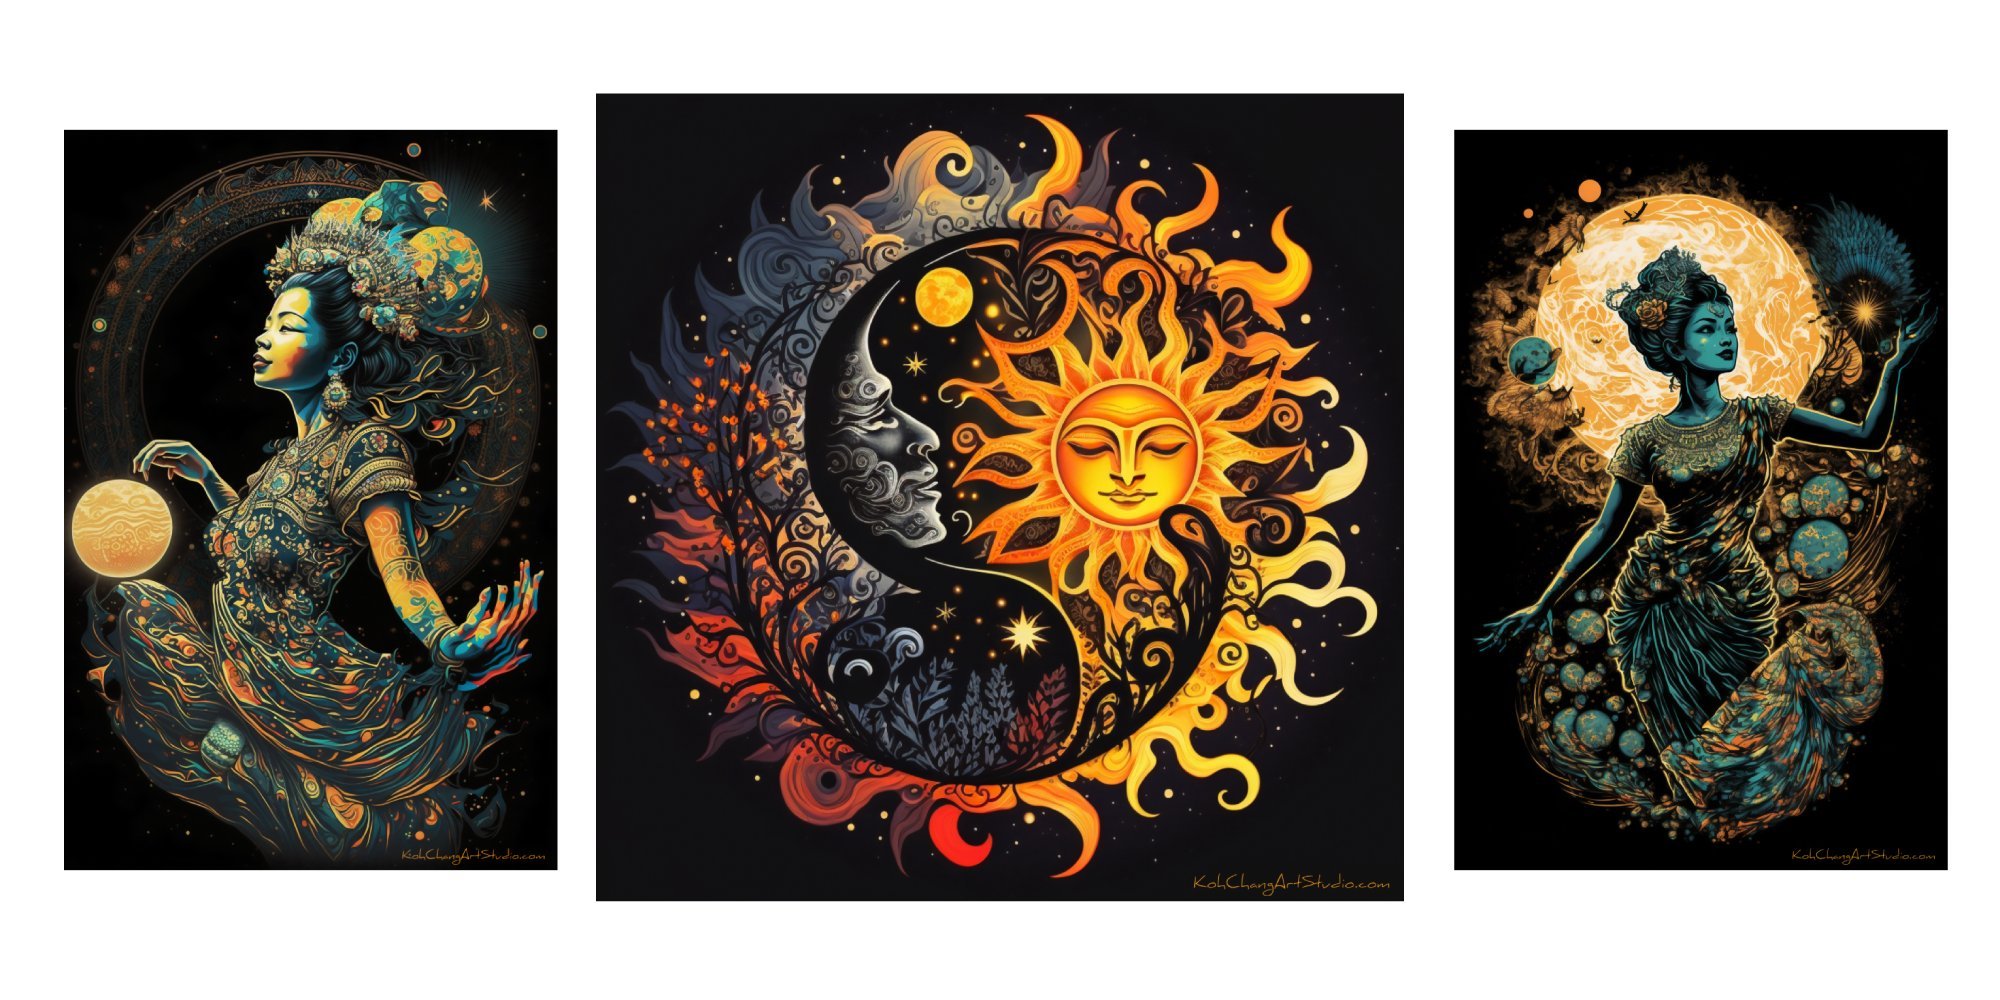 EQUINOX Design - Dancers under the moon, sun and moon duality, reflecting the universe's choreography.